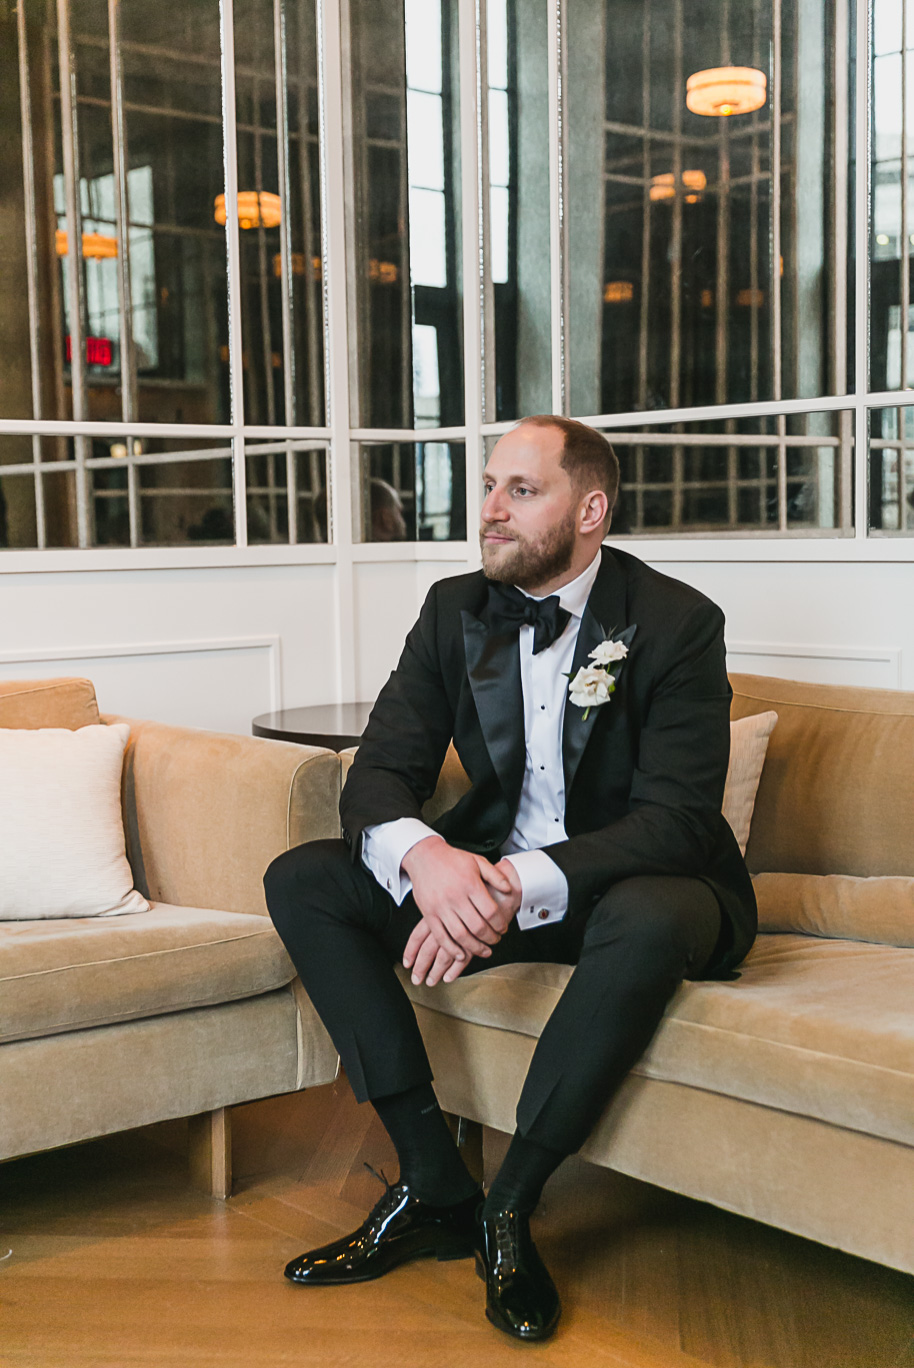 Winter Shinola Hotel Wedding in Downtown Detroit, Michigan provided by Kari Dawson, top-rated Detroit wedding photographer, and her team.